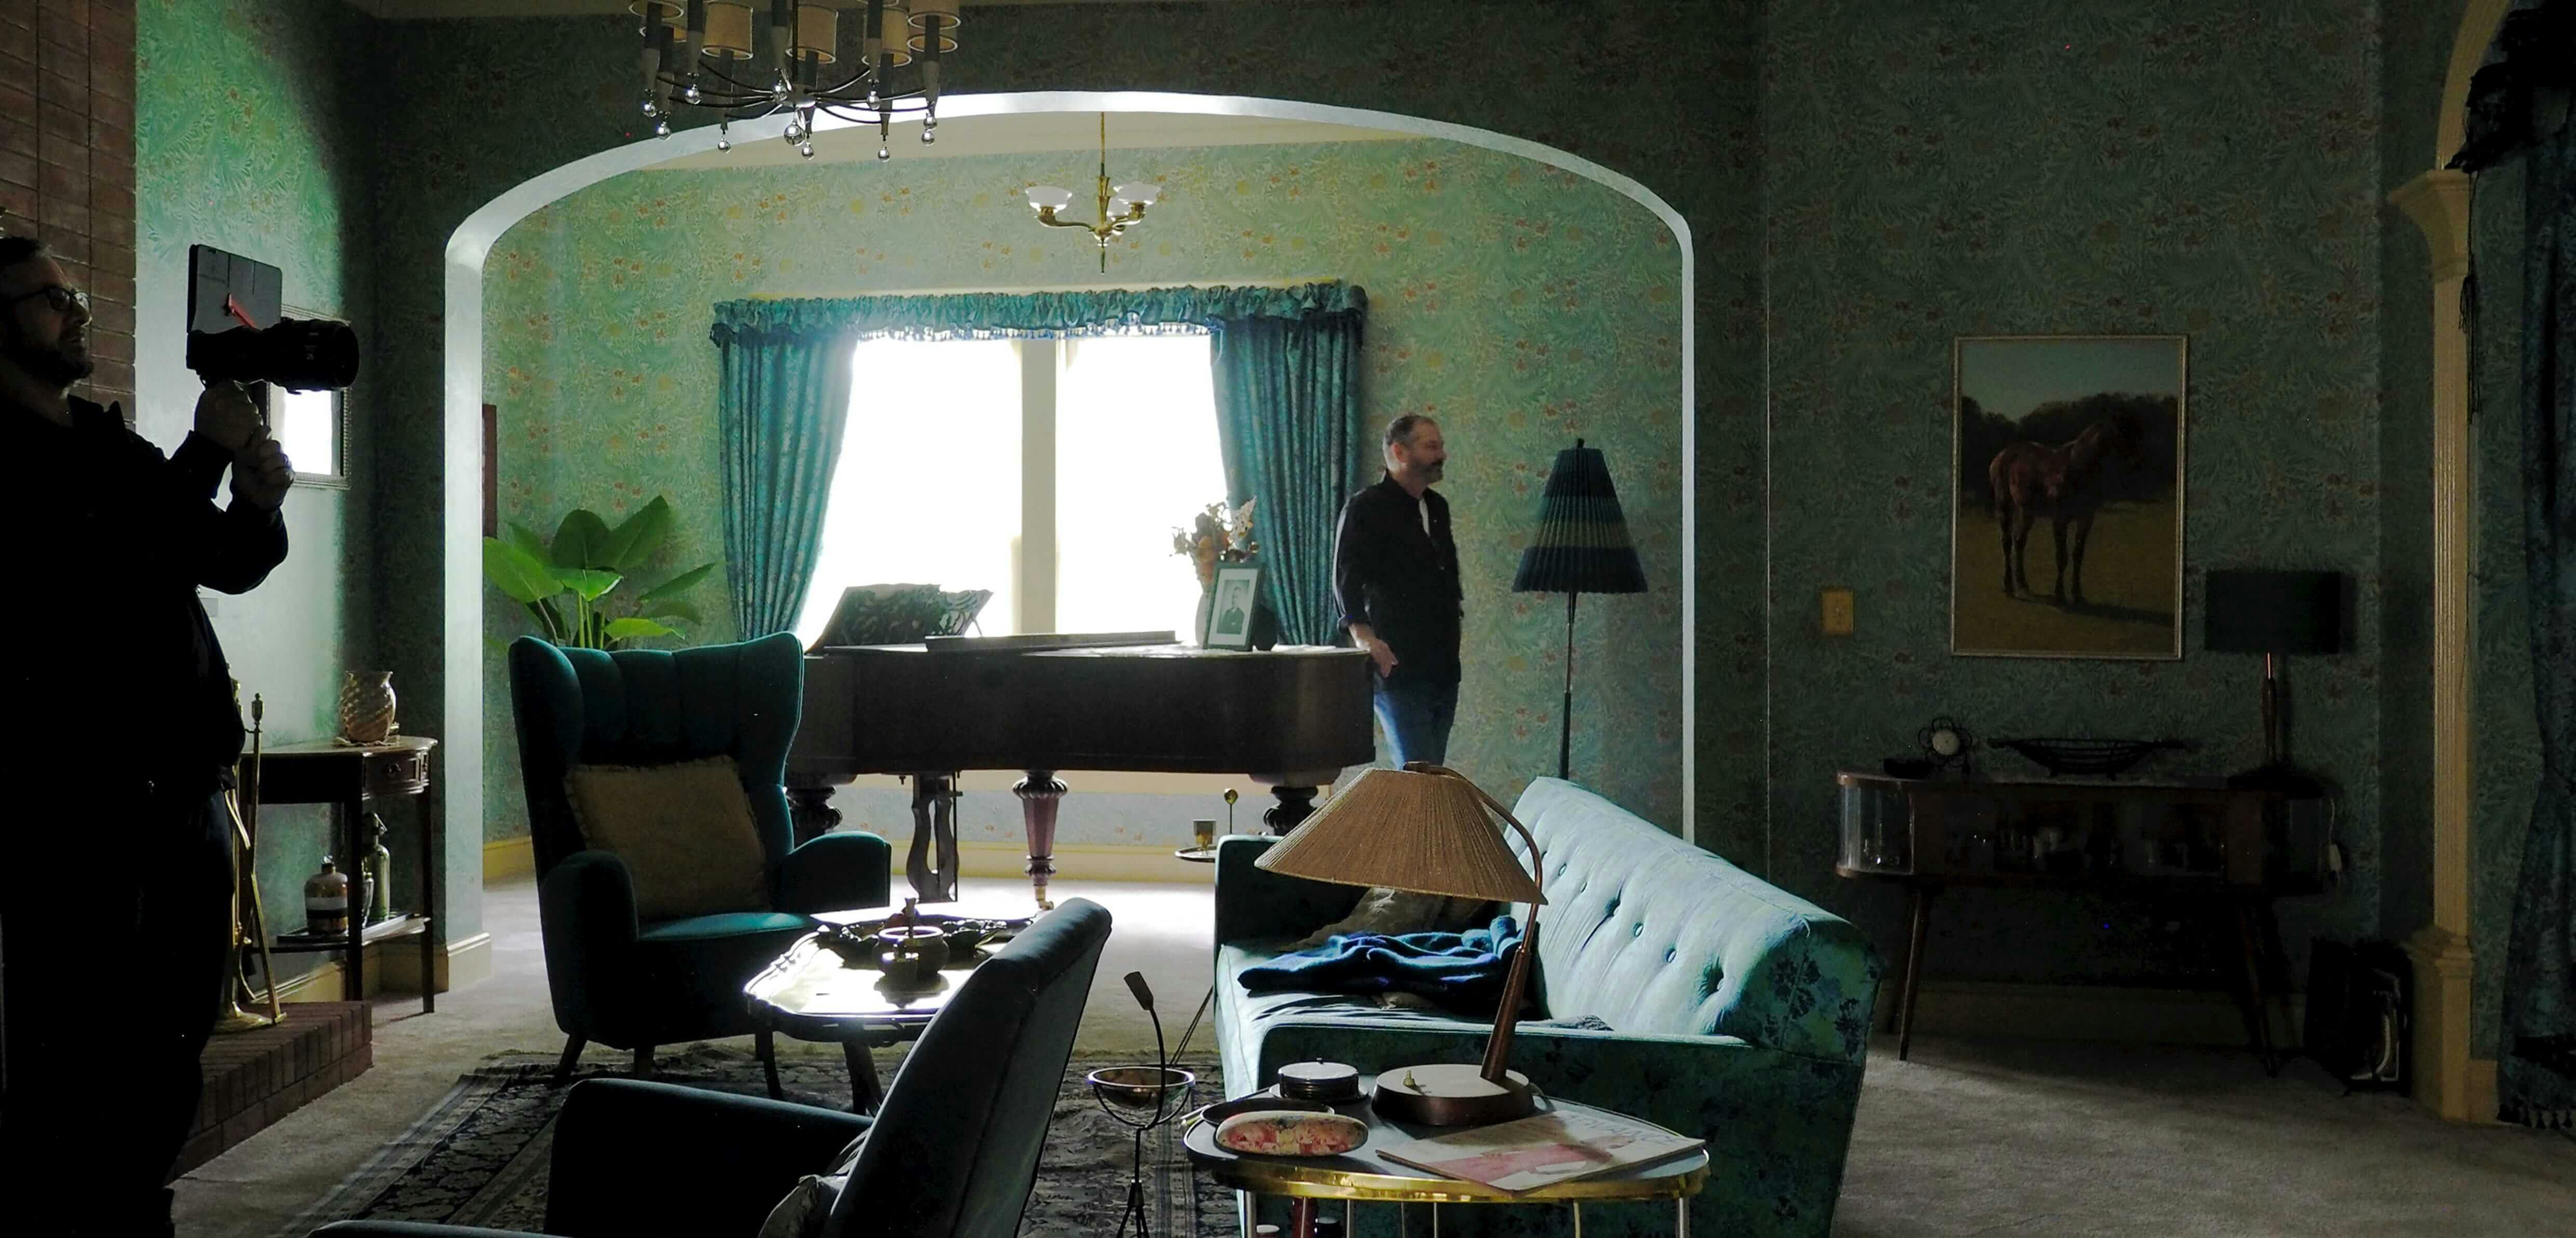 Inside the House From Netflix's The Queen's Gambit